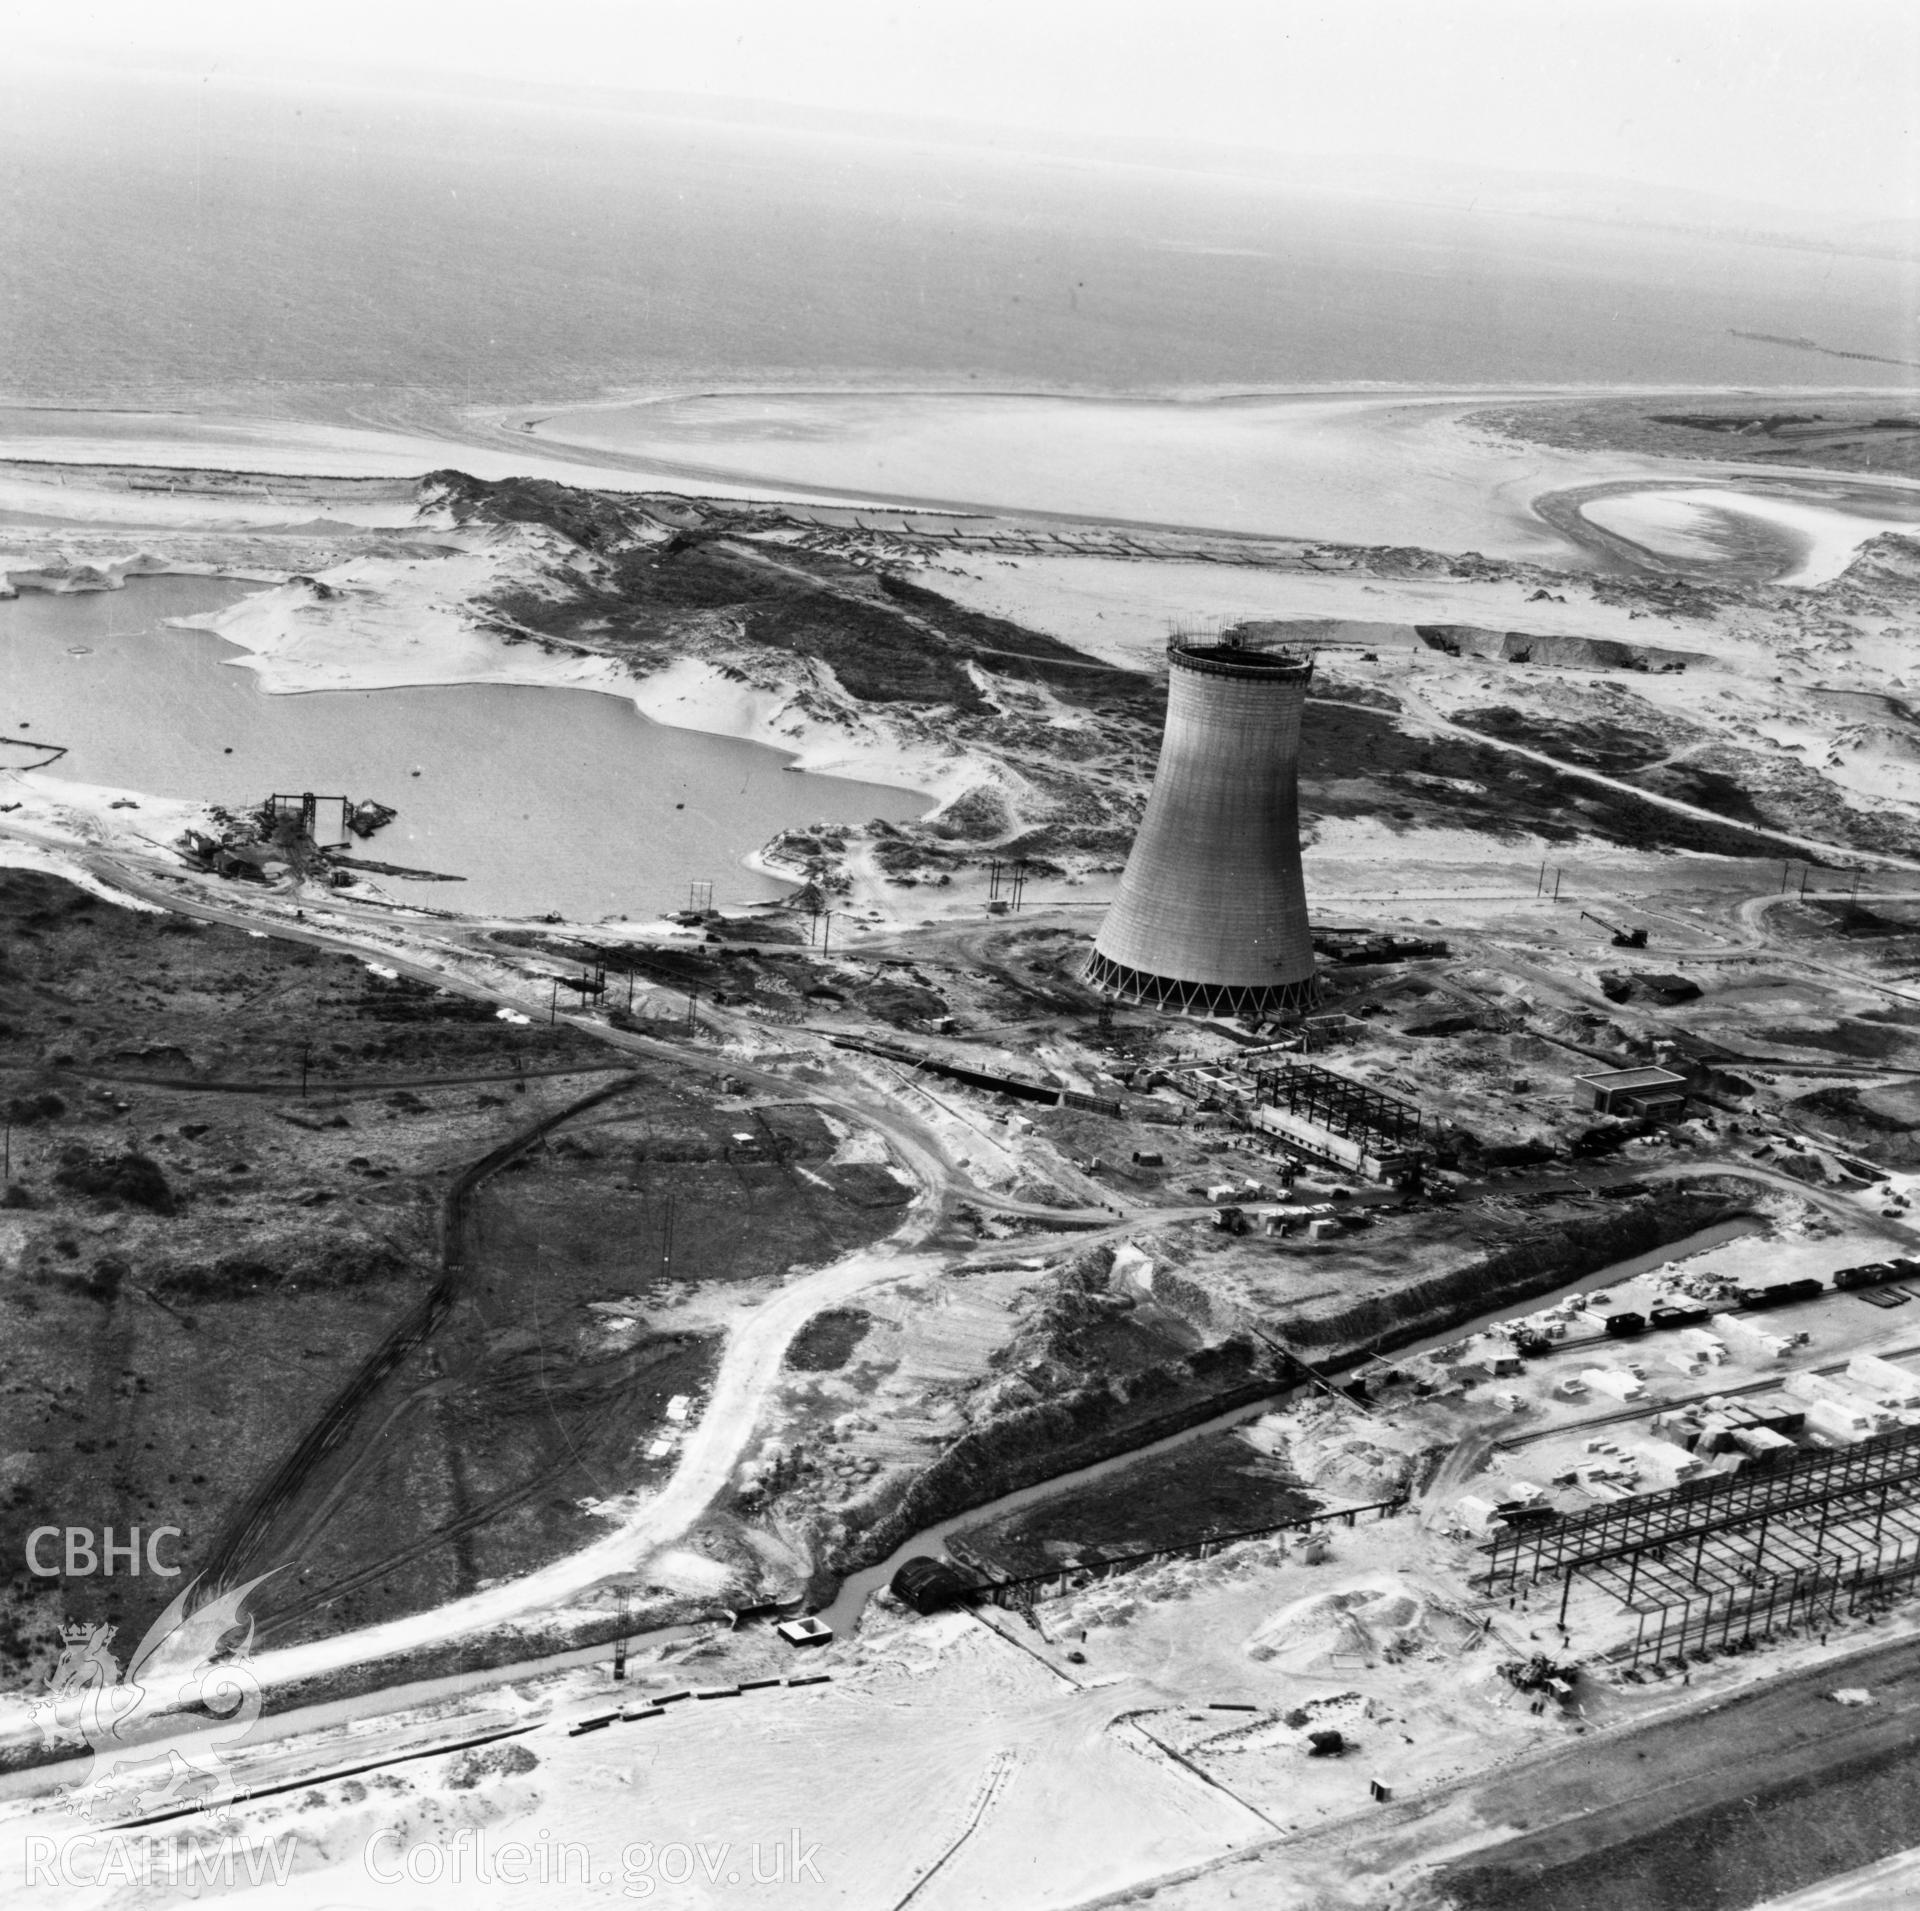 View of Abbey Steelworks, Port Talbot, under construction, showing cooling tower. Oblique aerial photograph, 5?" cut roll film.